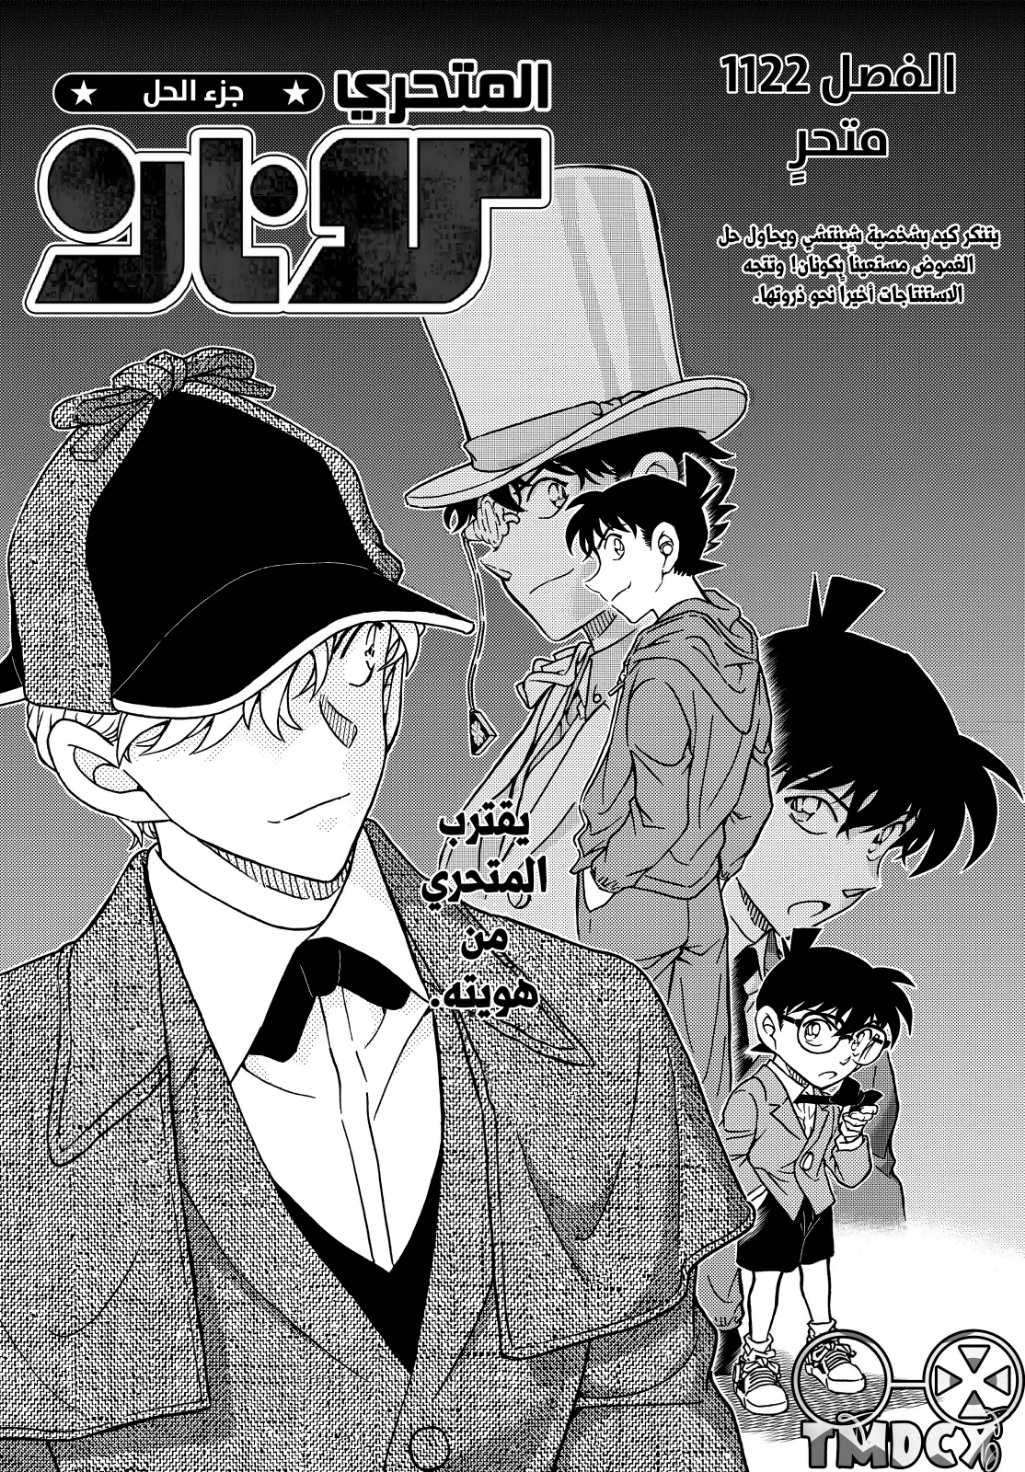 Detective Conan: Chapter 1122 - Page 1